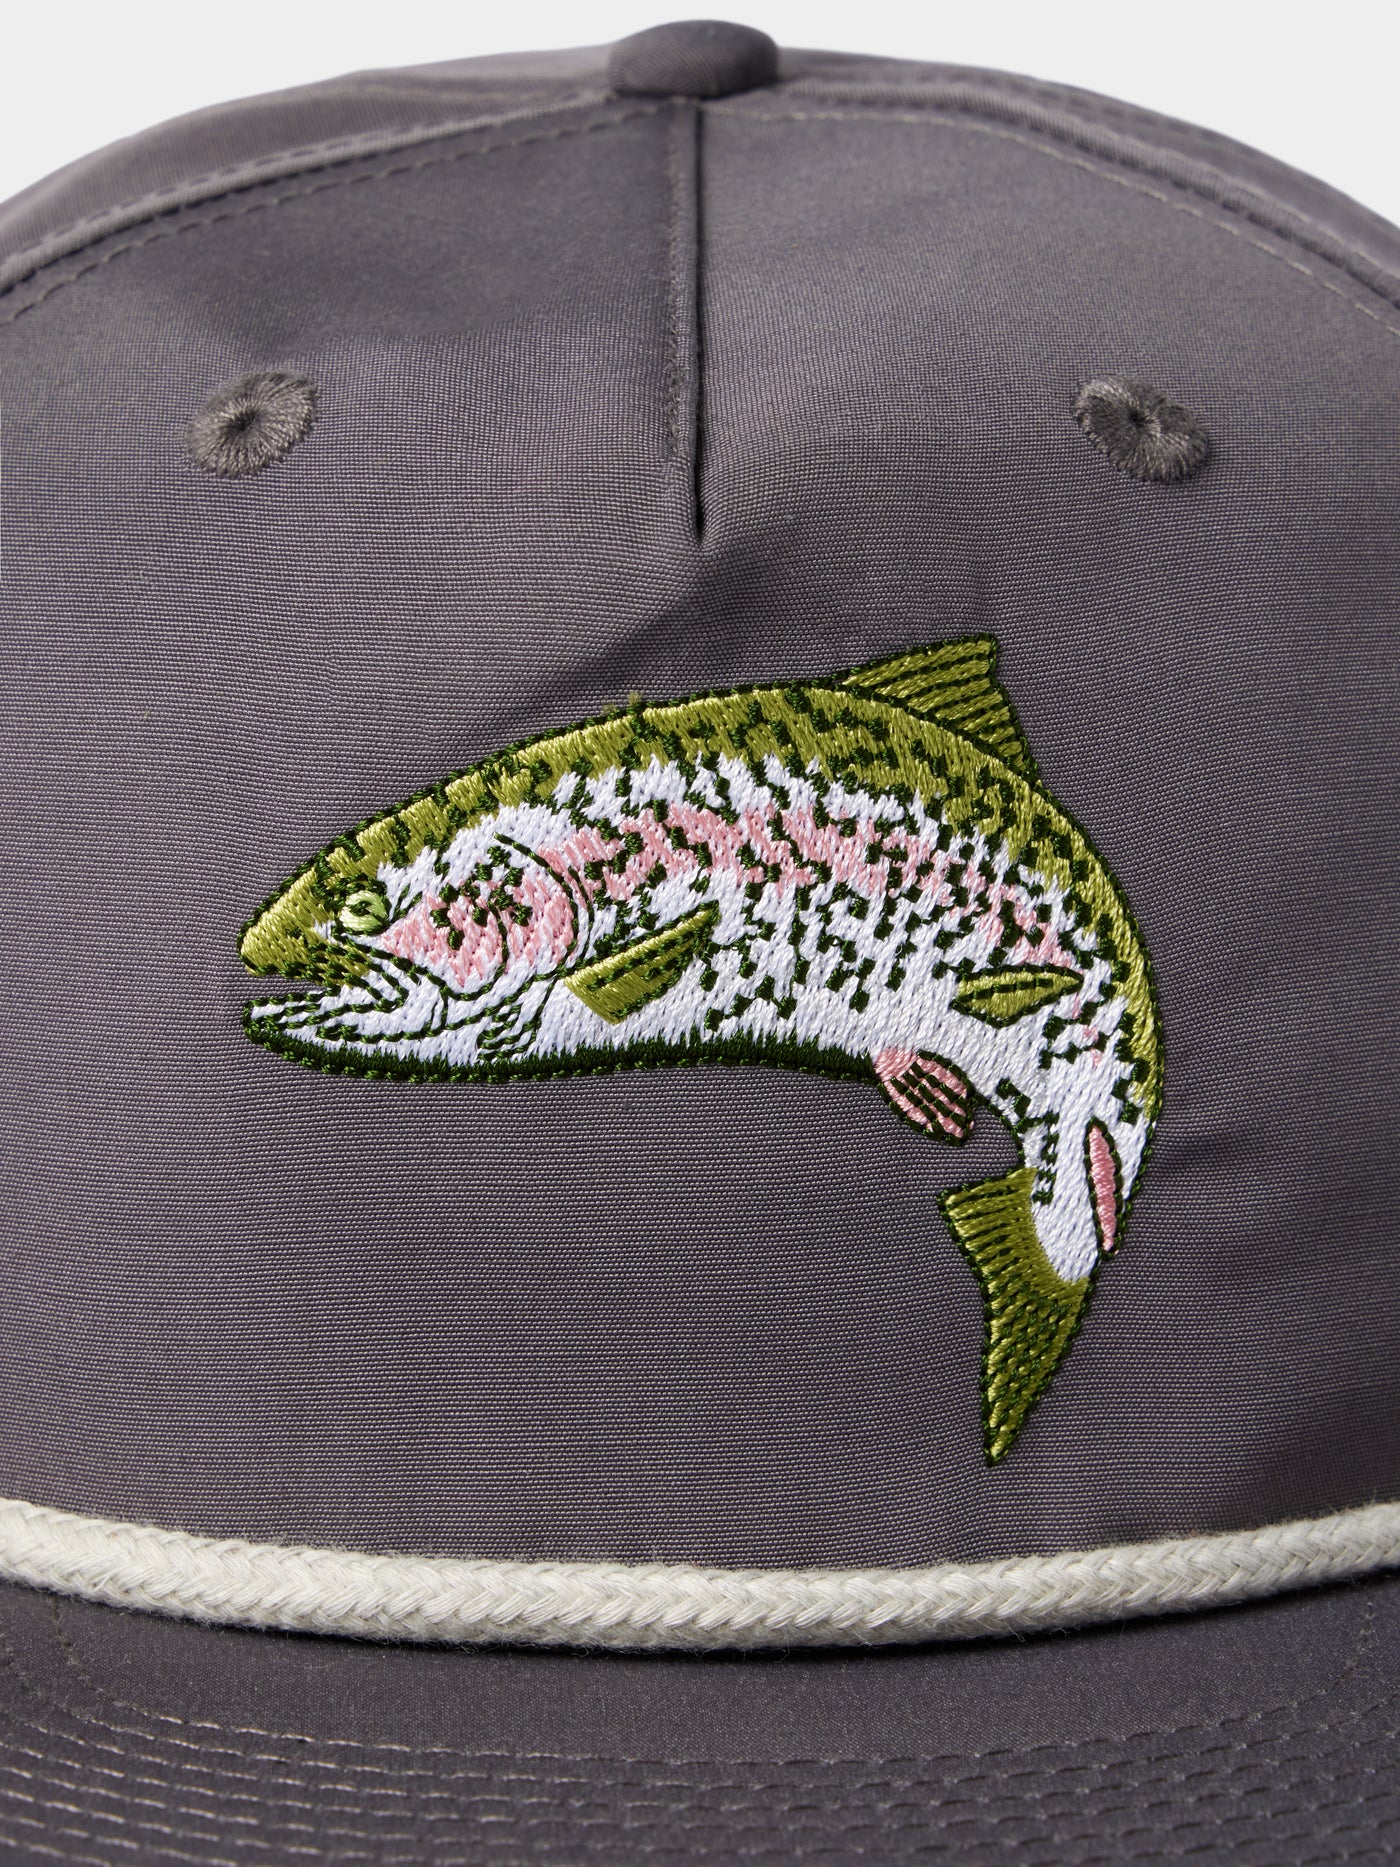 All About Trout Hat - Black Rainbow 6 Panel Hat